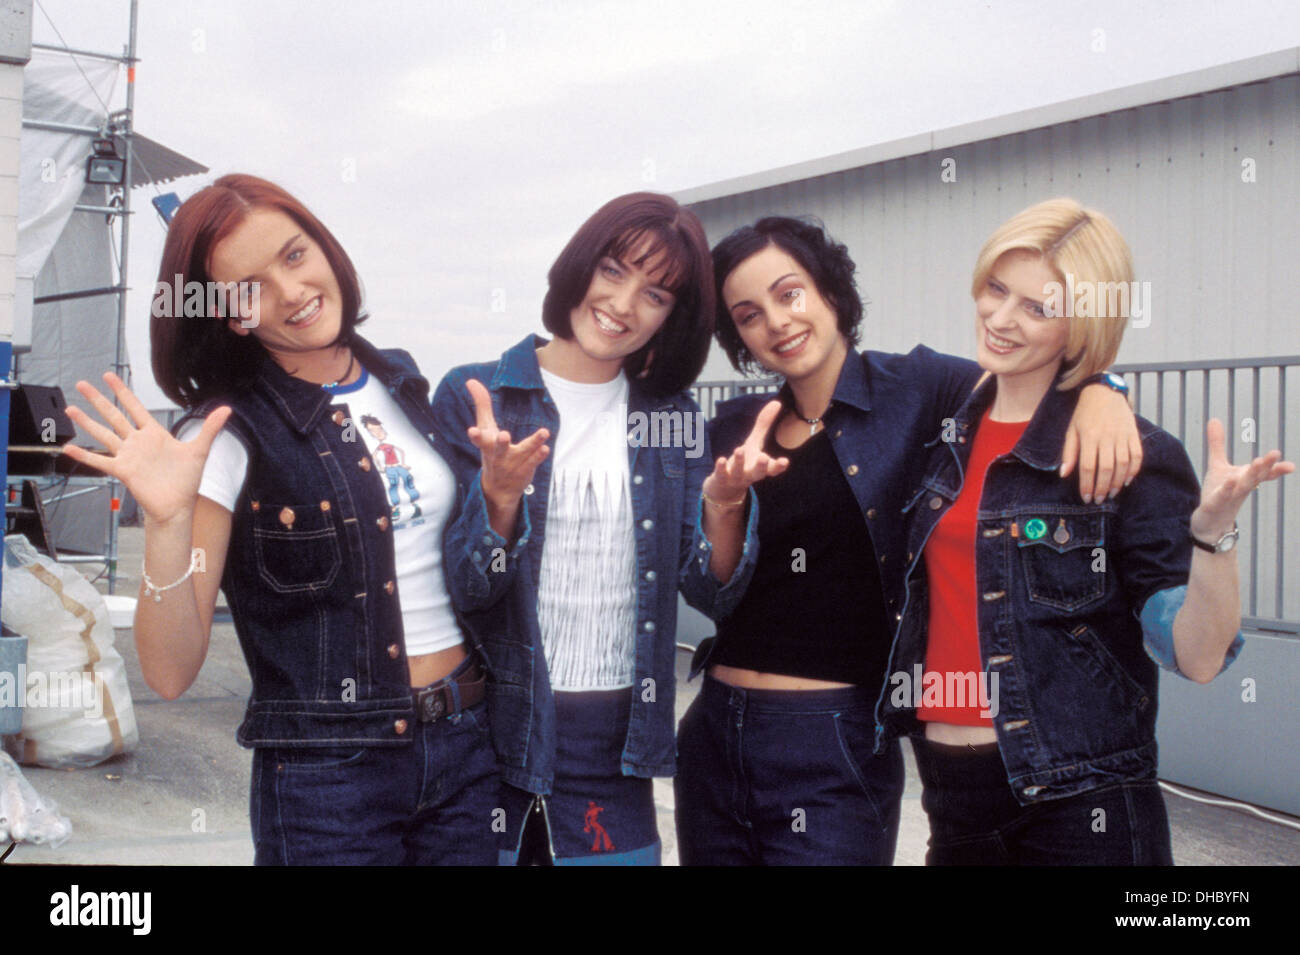 BEWITCHED Irish girl group in 1999. Stock Photo